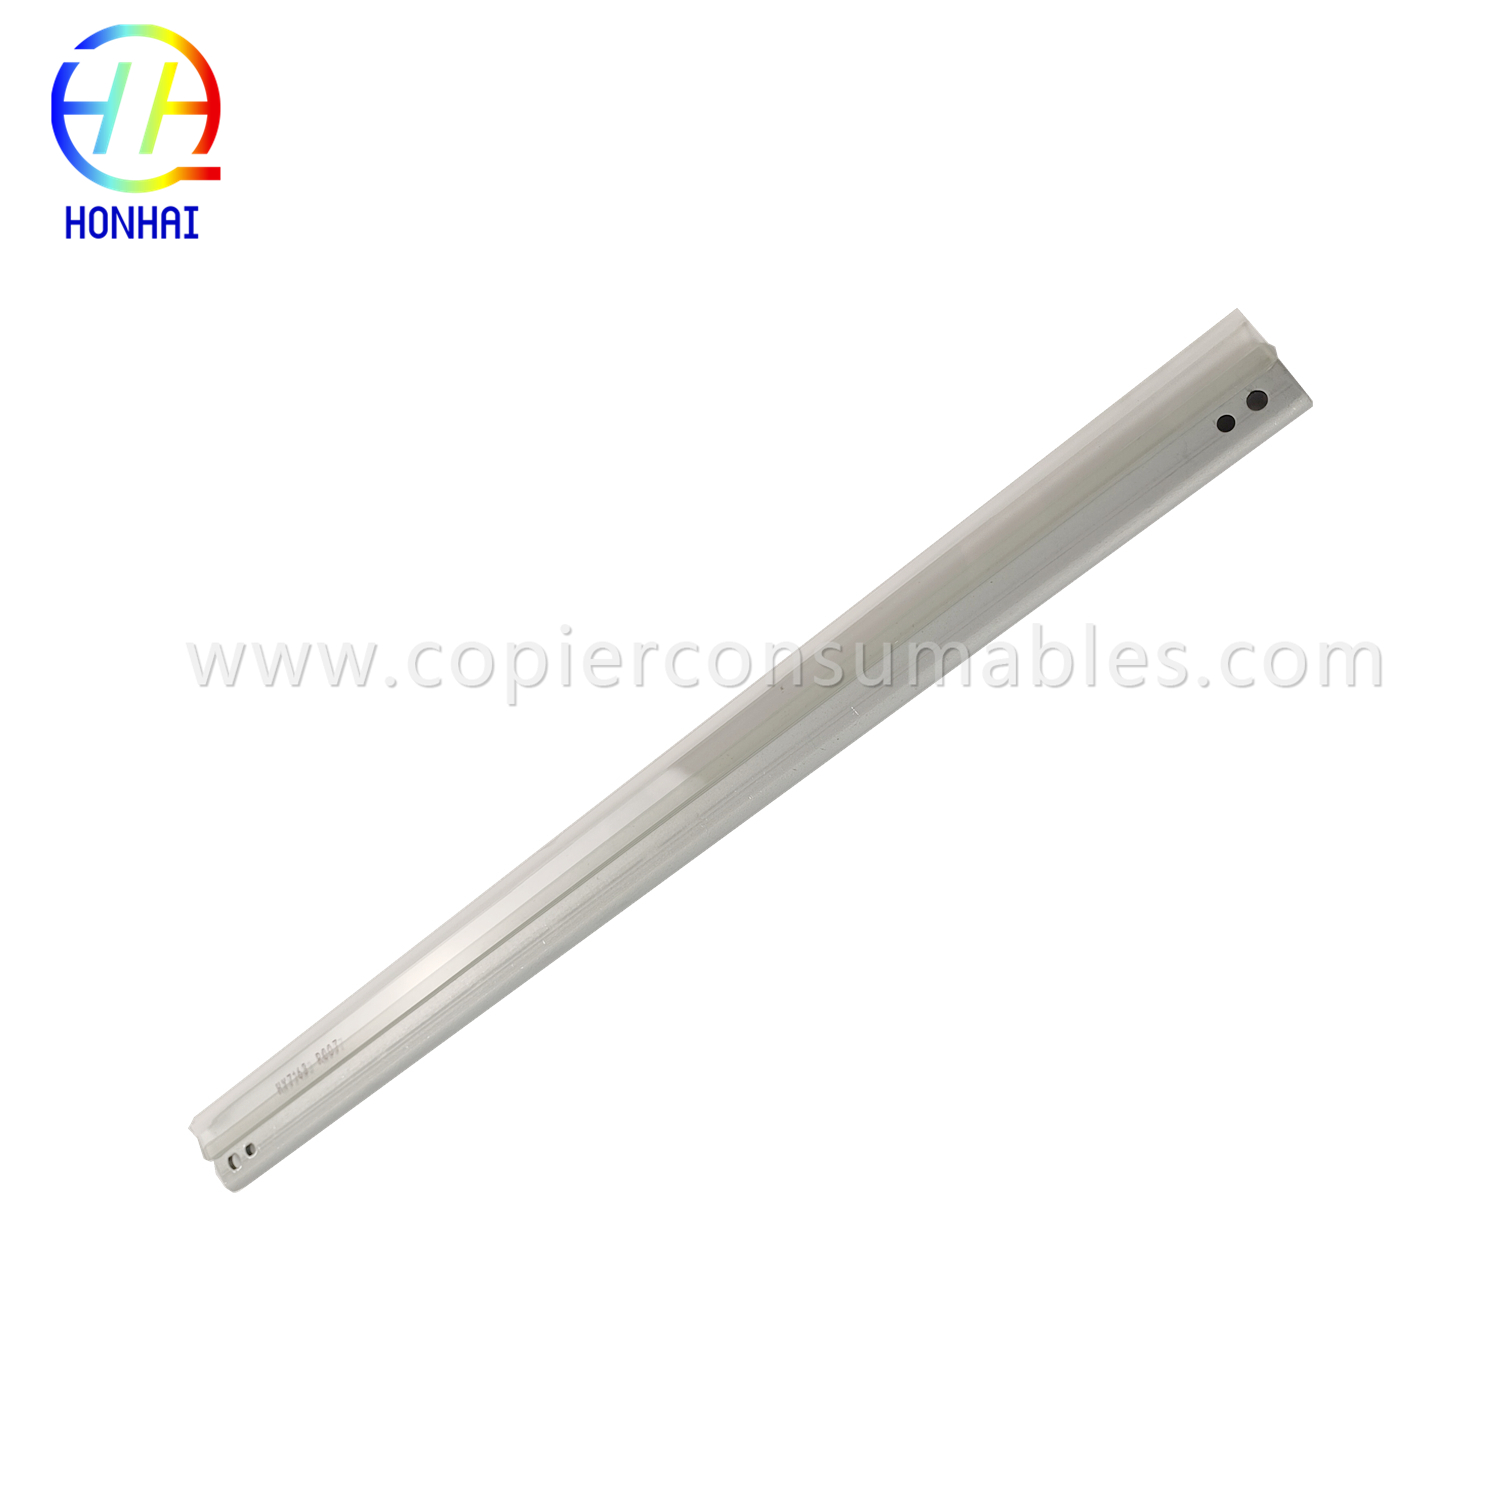 Drum cleaning blade for Ricoh MPC3003 MPC3503 MPC3004 MPC3504 MPC4503 MPC5503 MPC6003 MPC4504 MPC5504 MPC6004